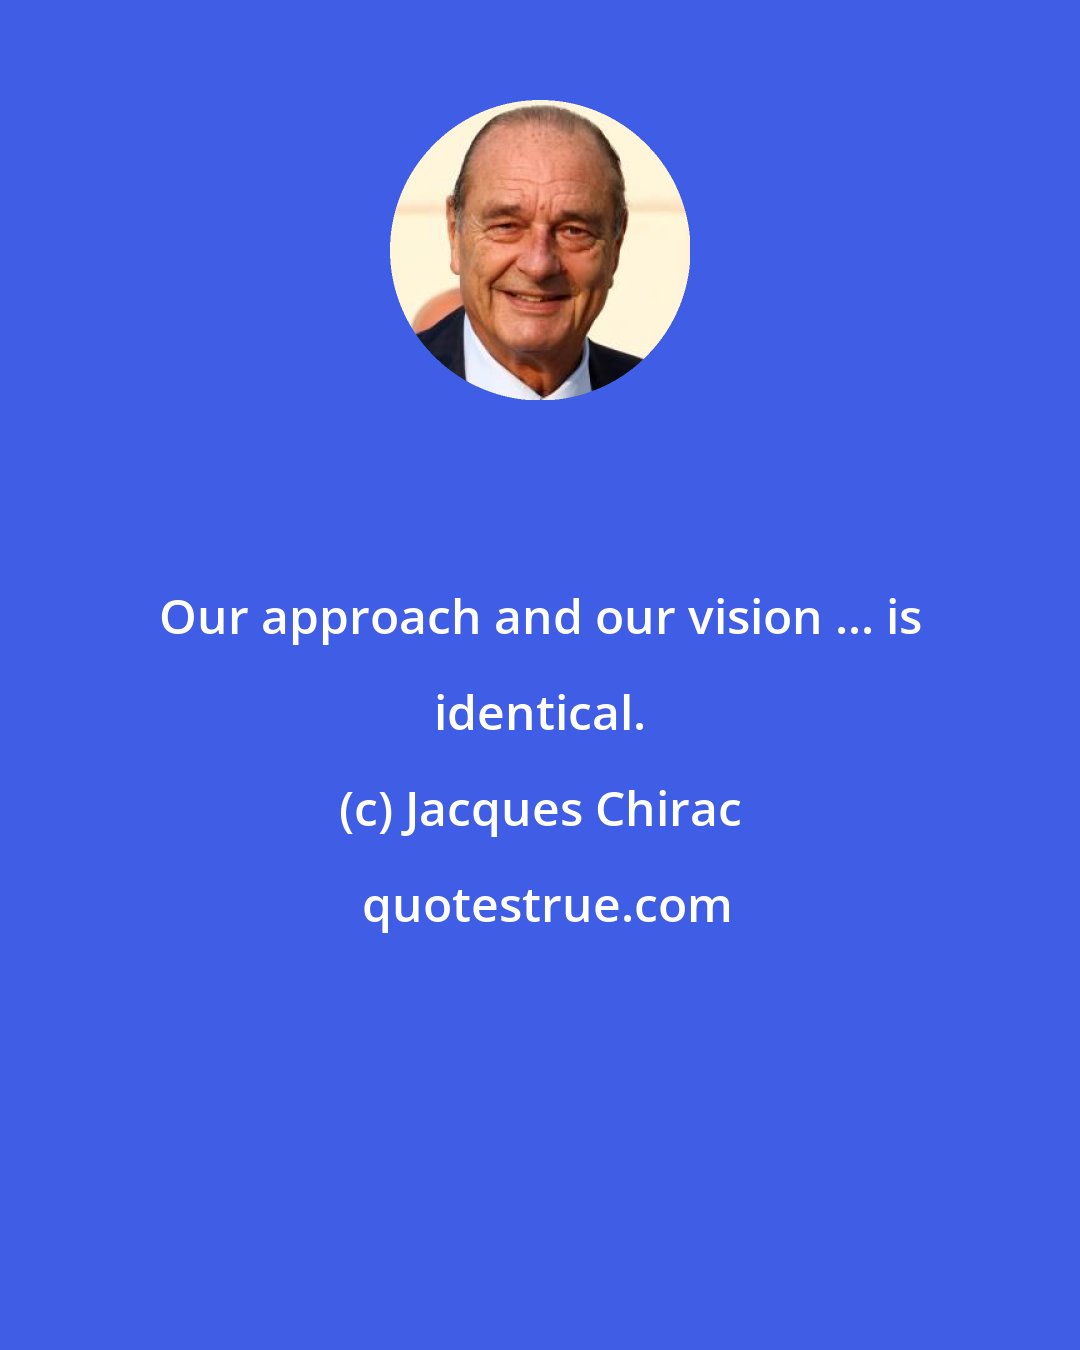 Jacques Chirac: Our approach and our vision ... is identical.